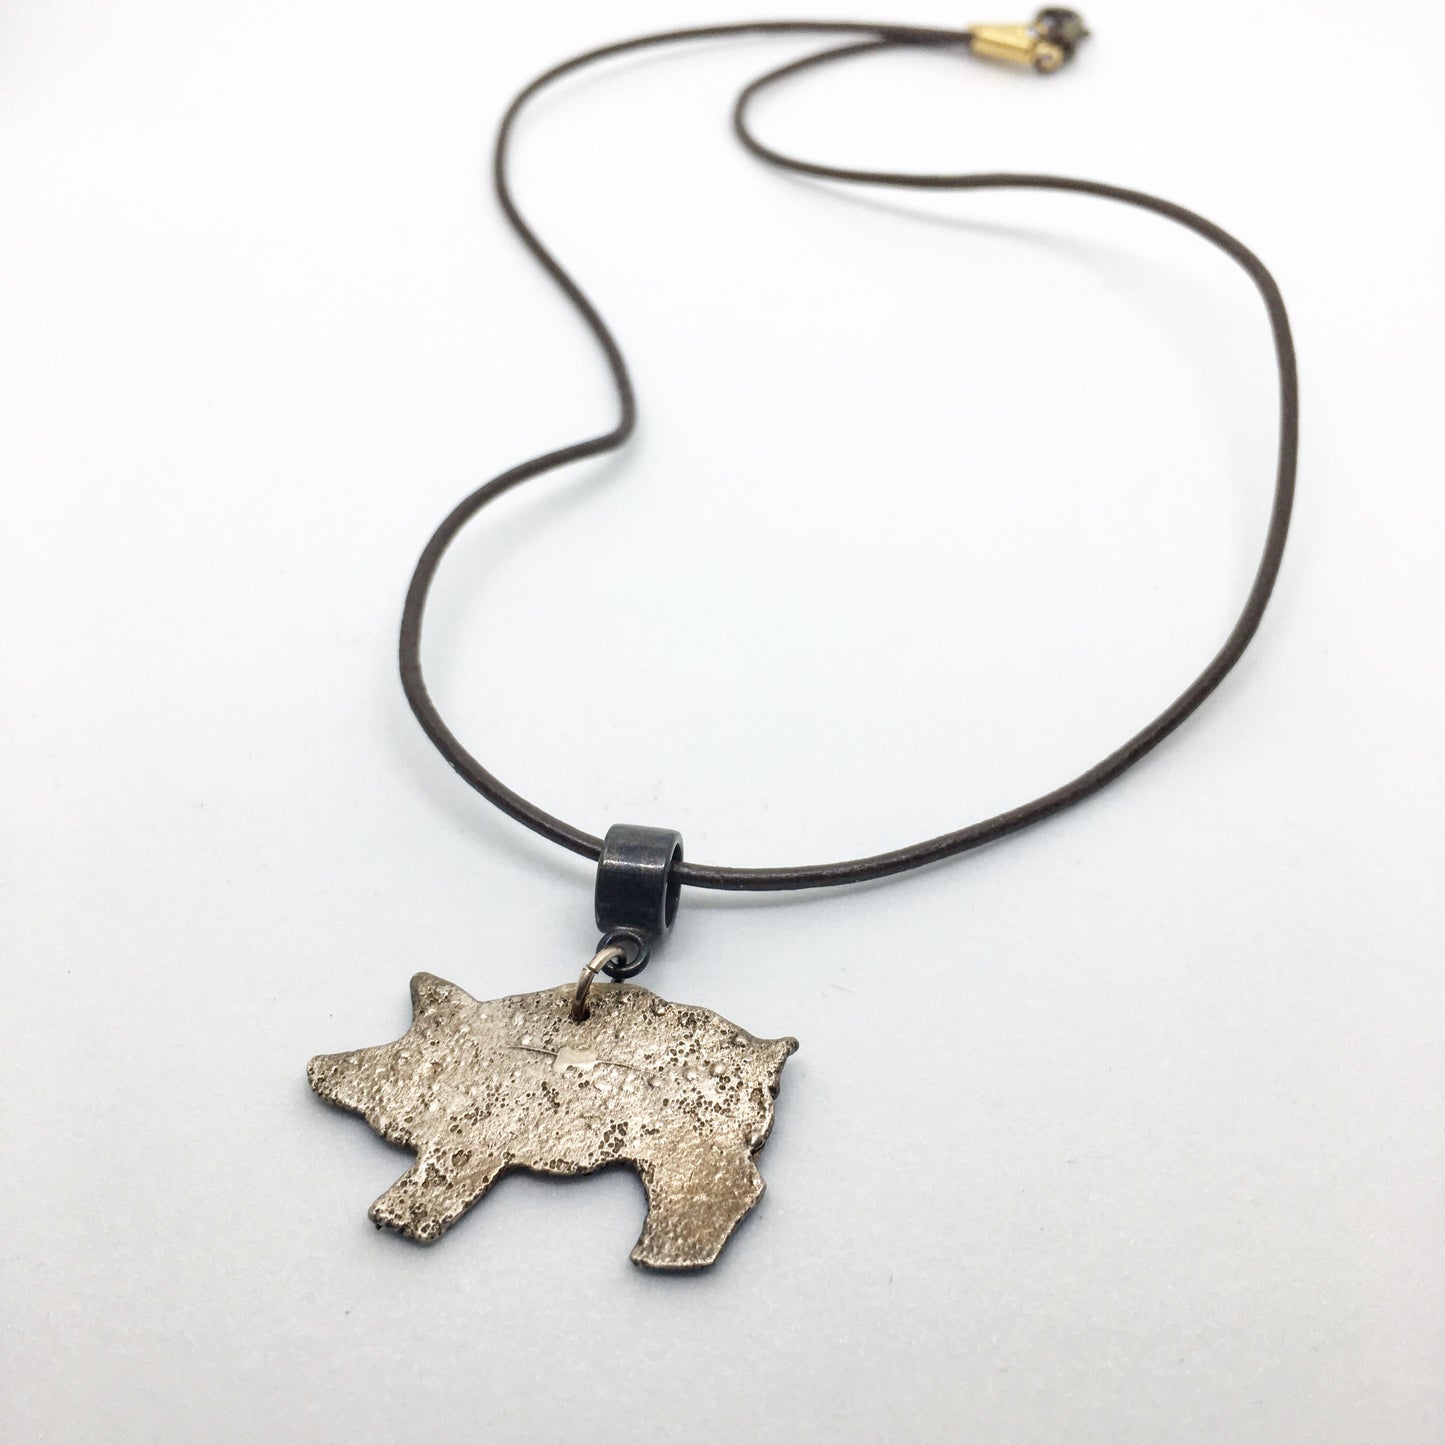 Pig Pendant Necklace on Leather Cord